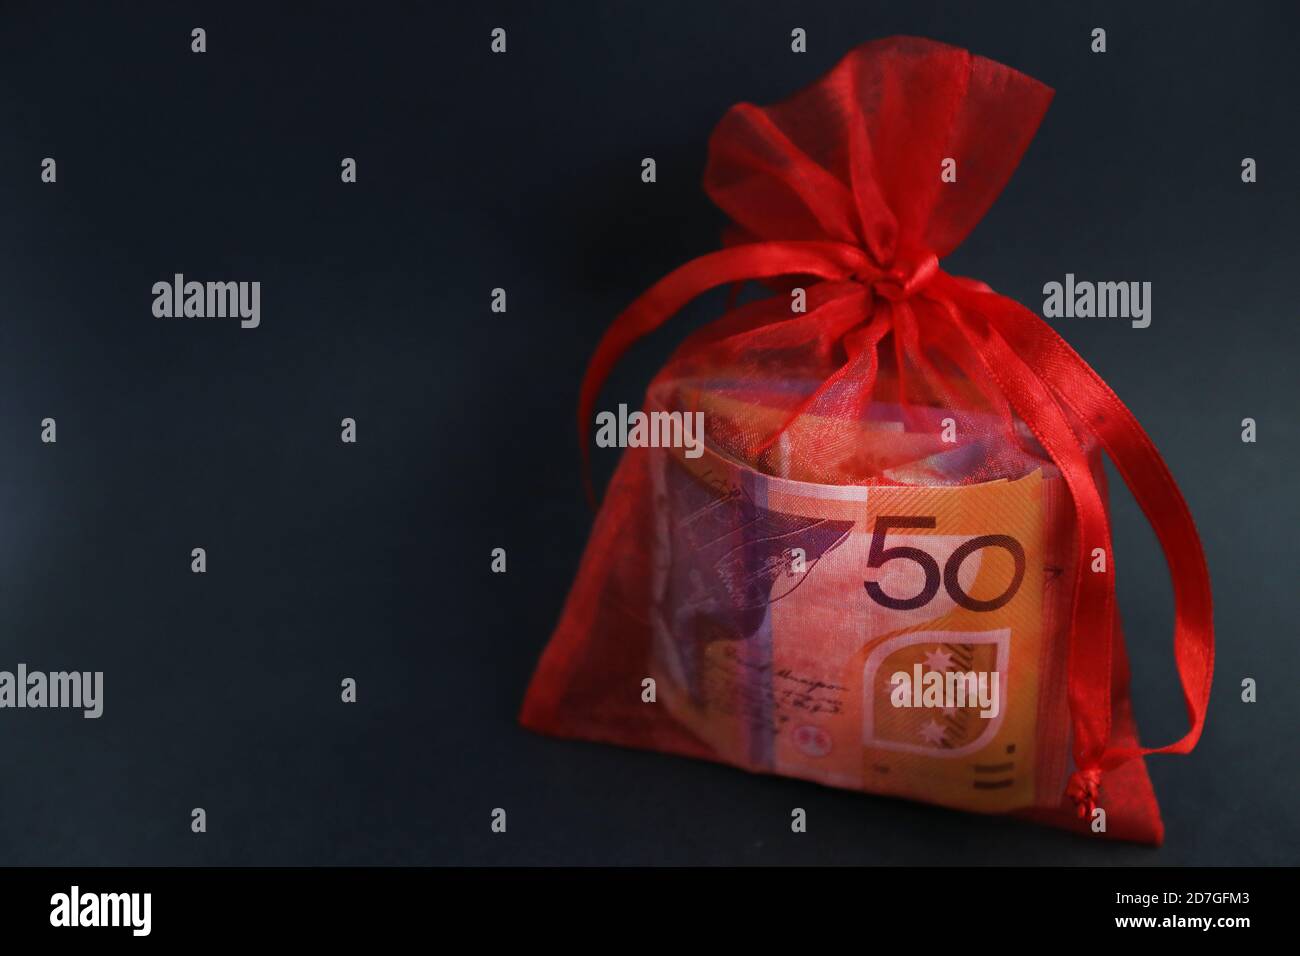 A pretty red glittery bag holding a wad of cash or currency. 50 fifty dollar note clearly visible through bag. Gift, financial assistance, support an Stock Photo